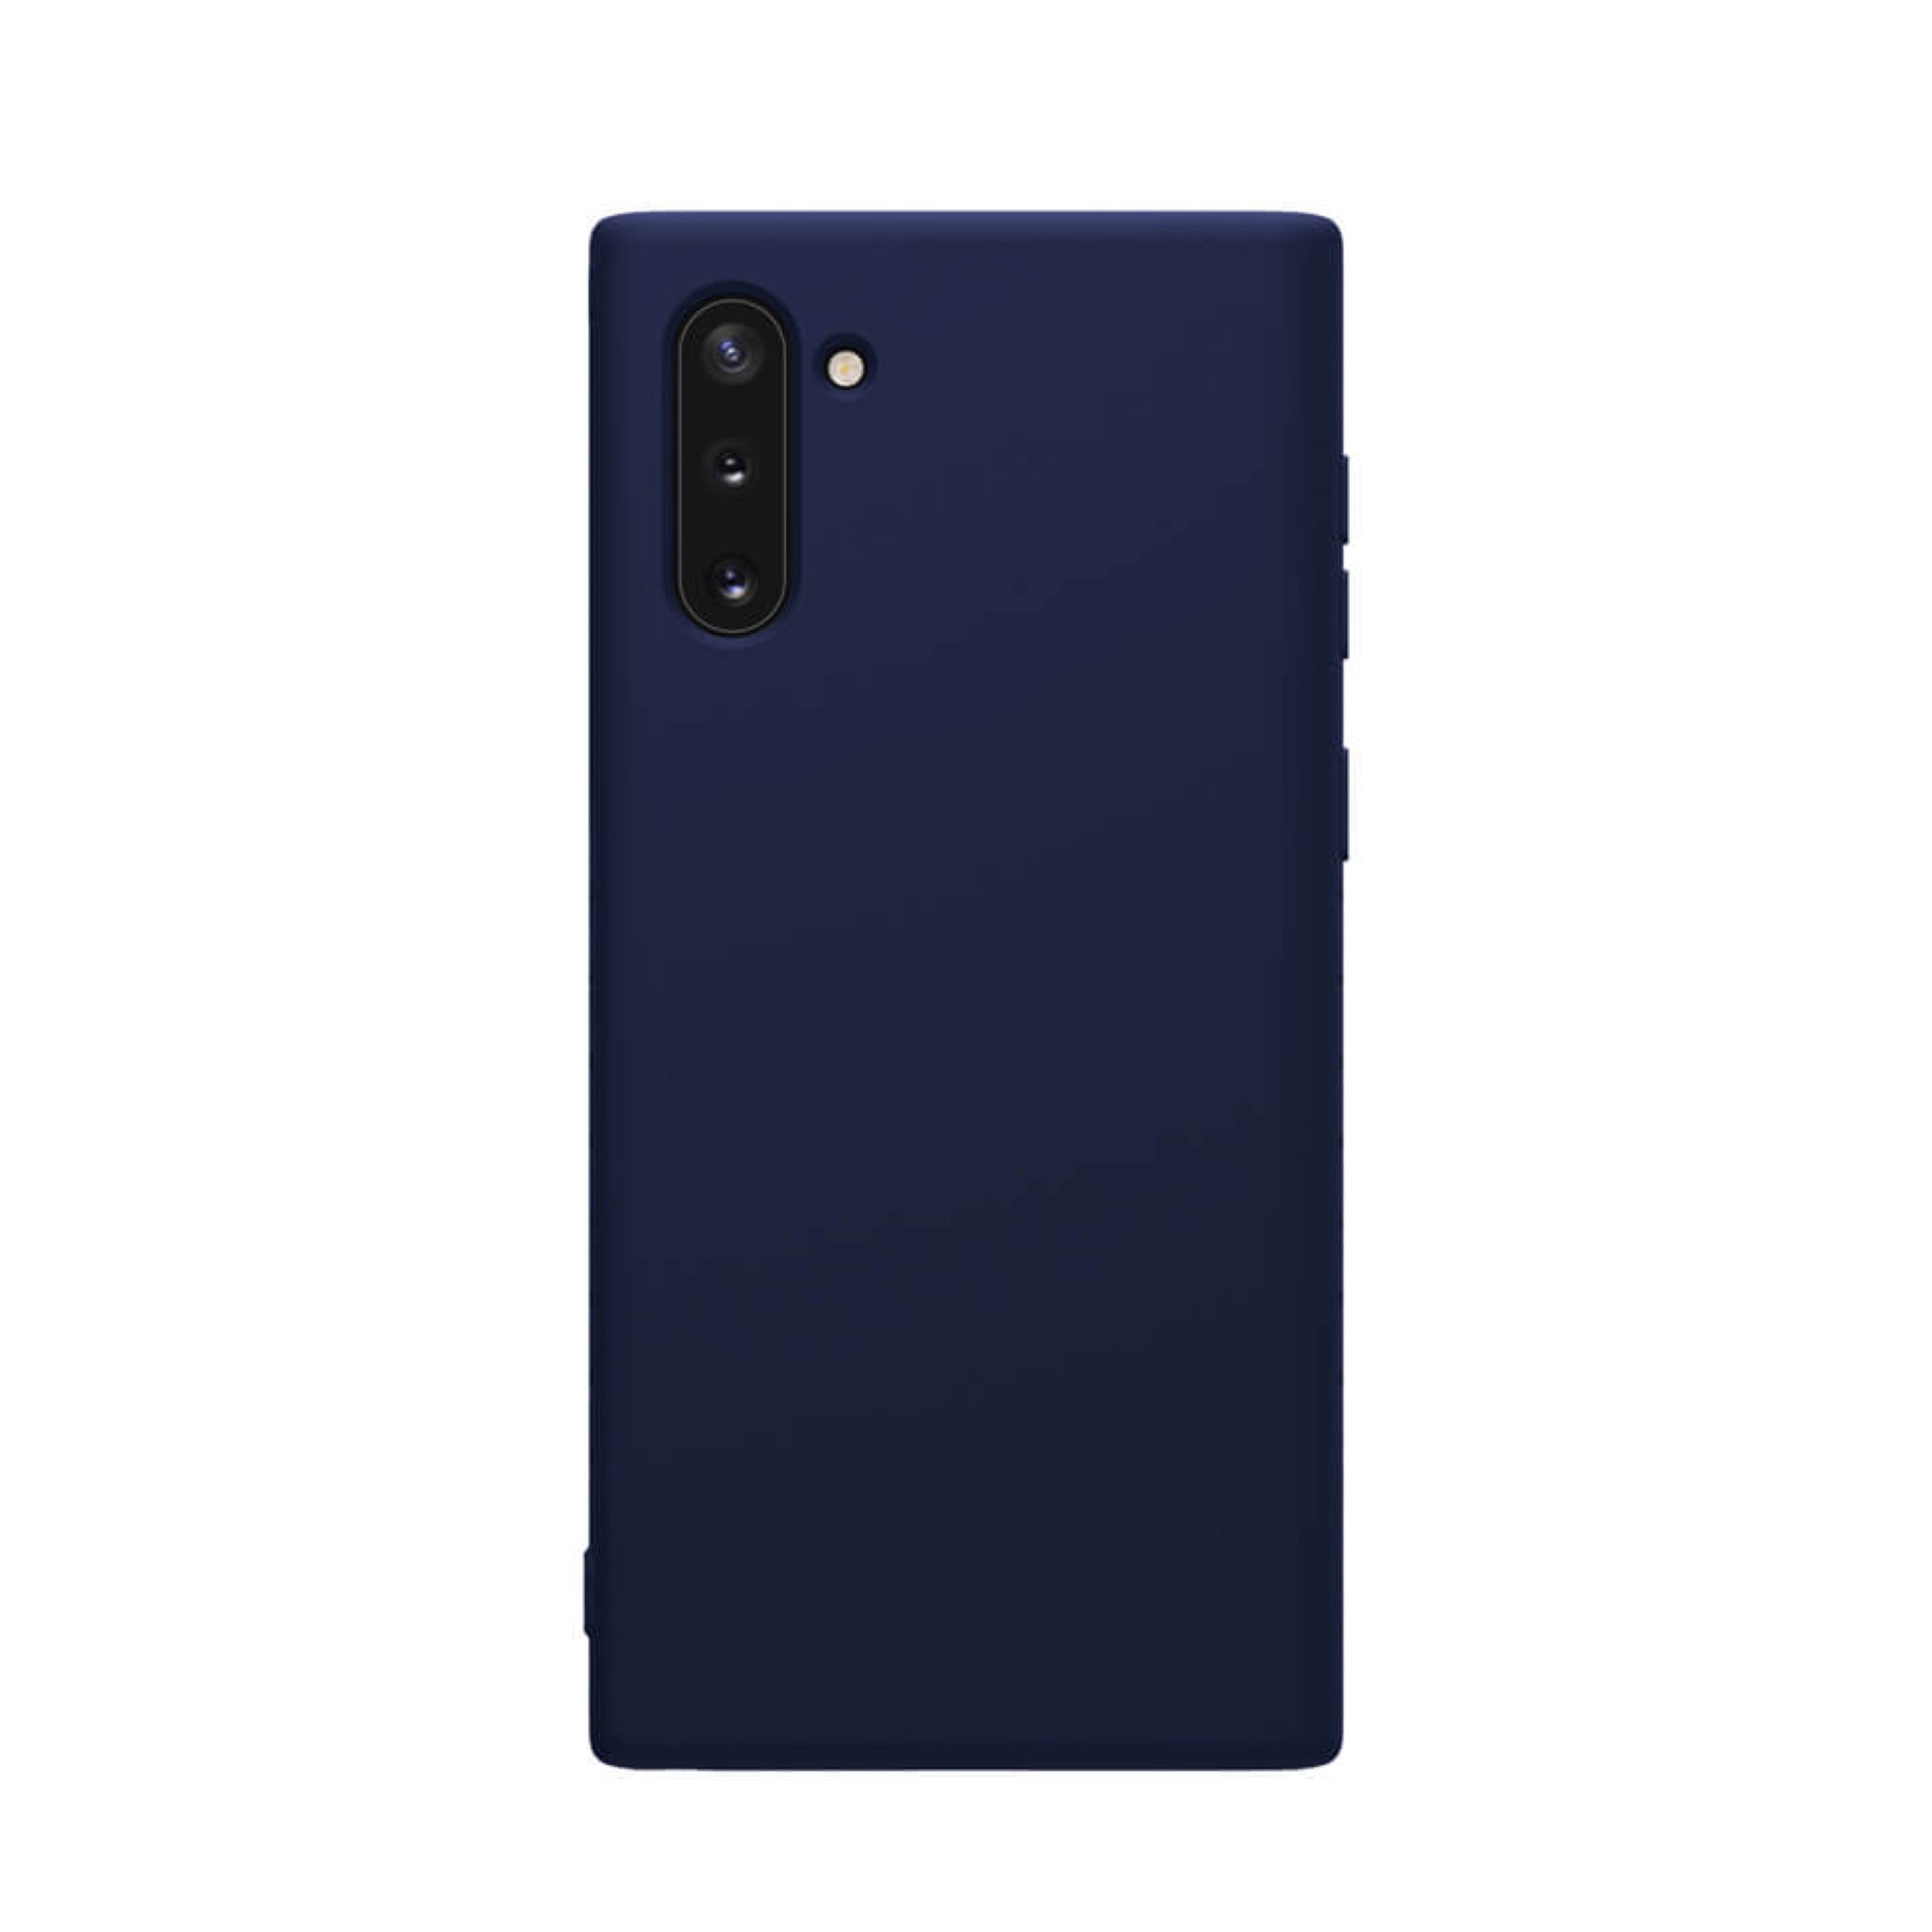 https://caserace.net/products/nillkin-rubber-wrapped-protective-cover-case-for-note-10-navy